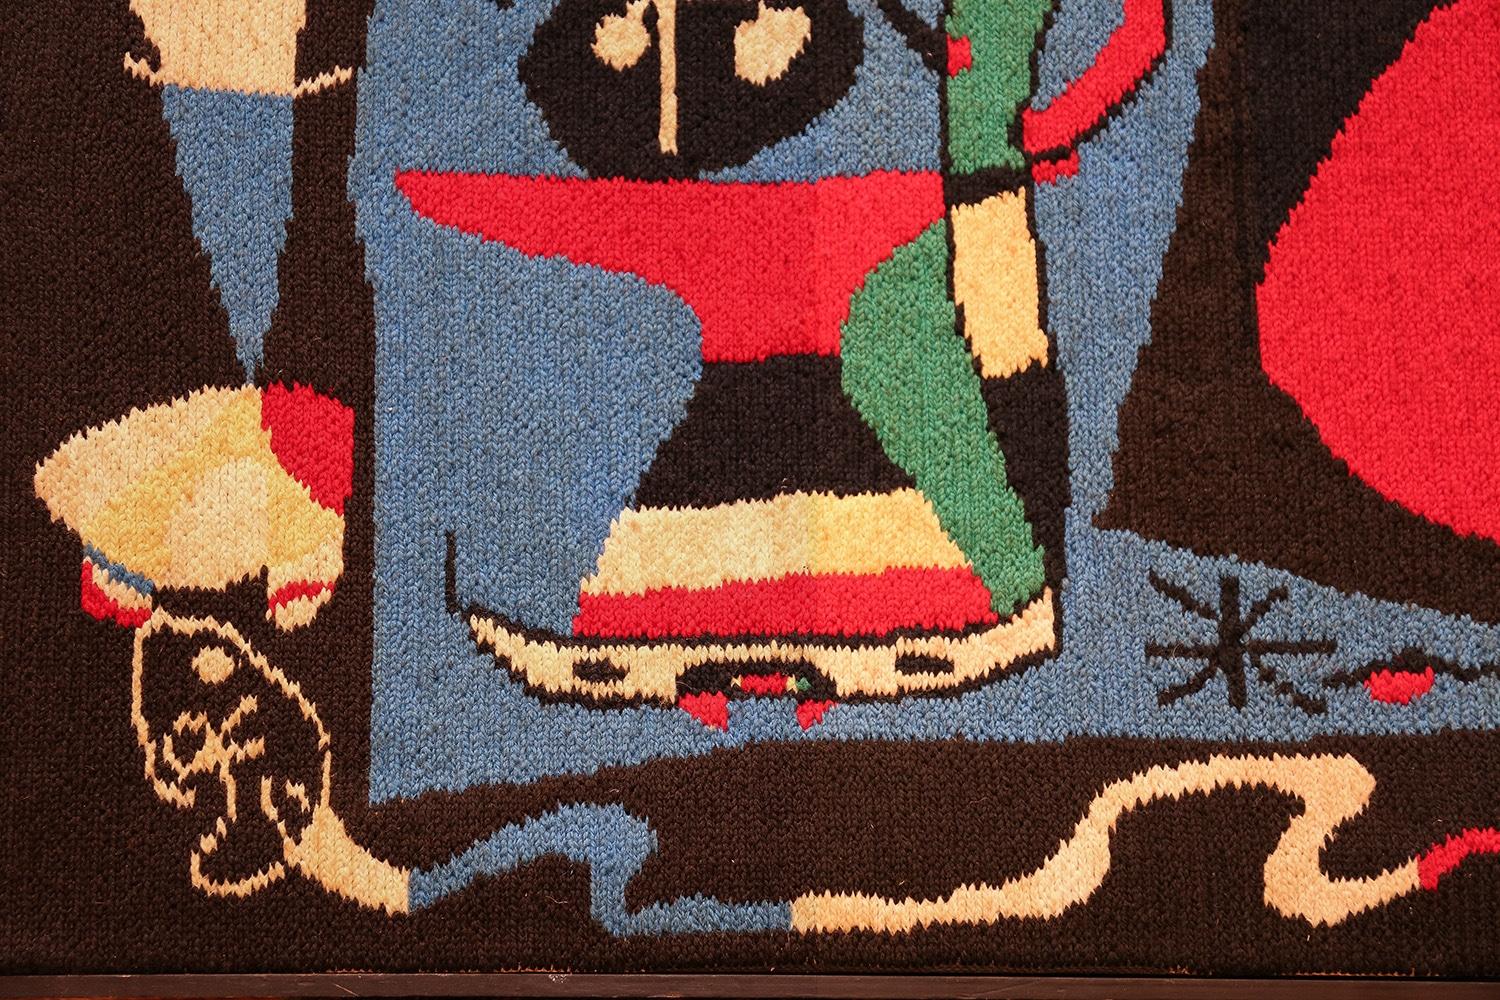 French Vintage Joan Miró Tapestry Rug. Size: 2 ft 10 in x 1 ft 10 in (0.86 m x 0.56 m)